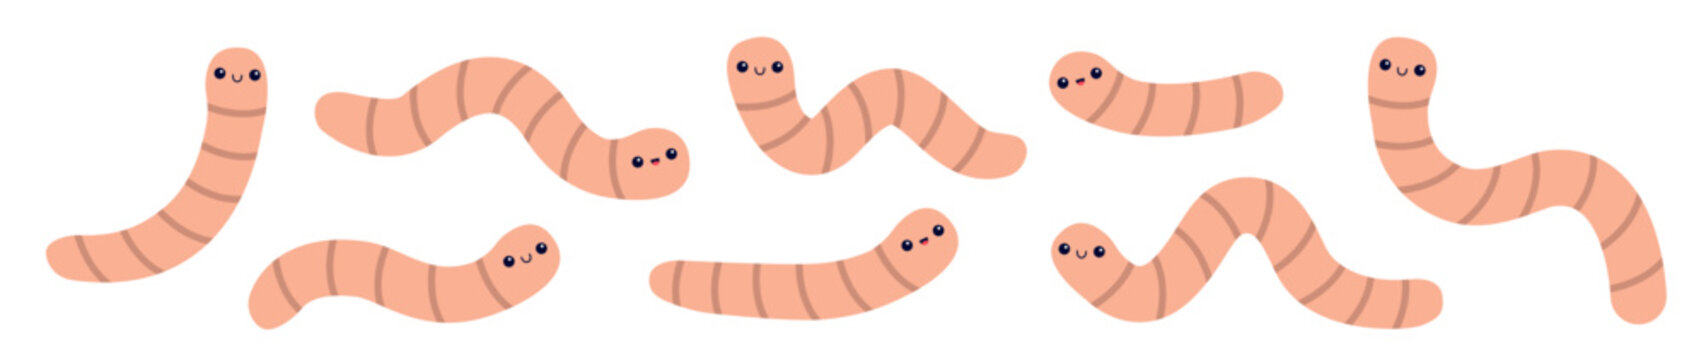 Naklejki Earthworm set line. Worm insect icon. Cartoon funny kawaii baby animal character. Cute crawling bug collection. Smiling face. Pink color. Flat design. White background. Isolated